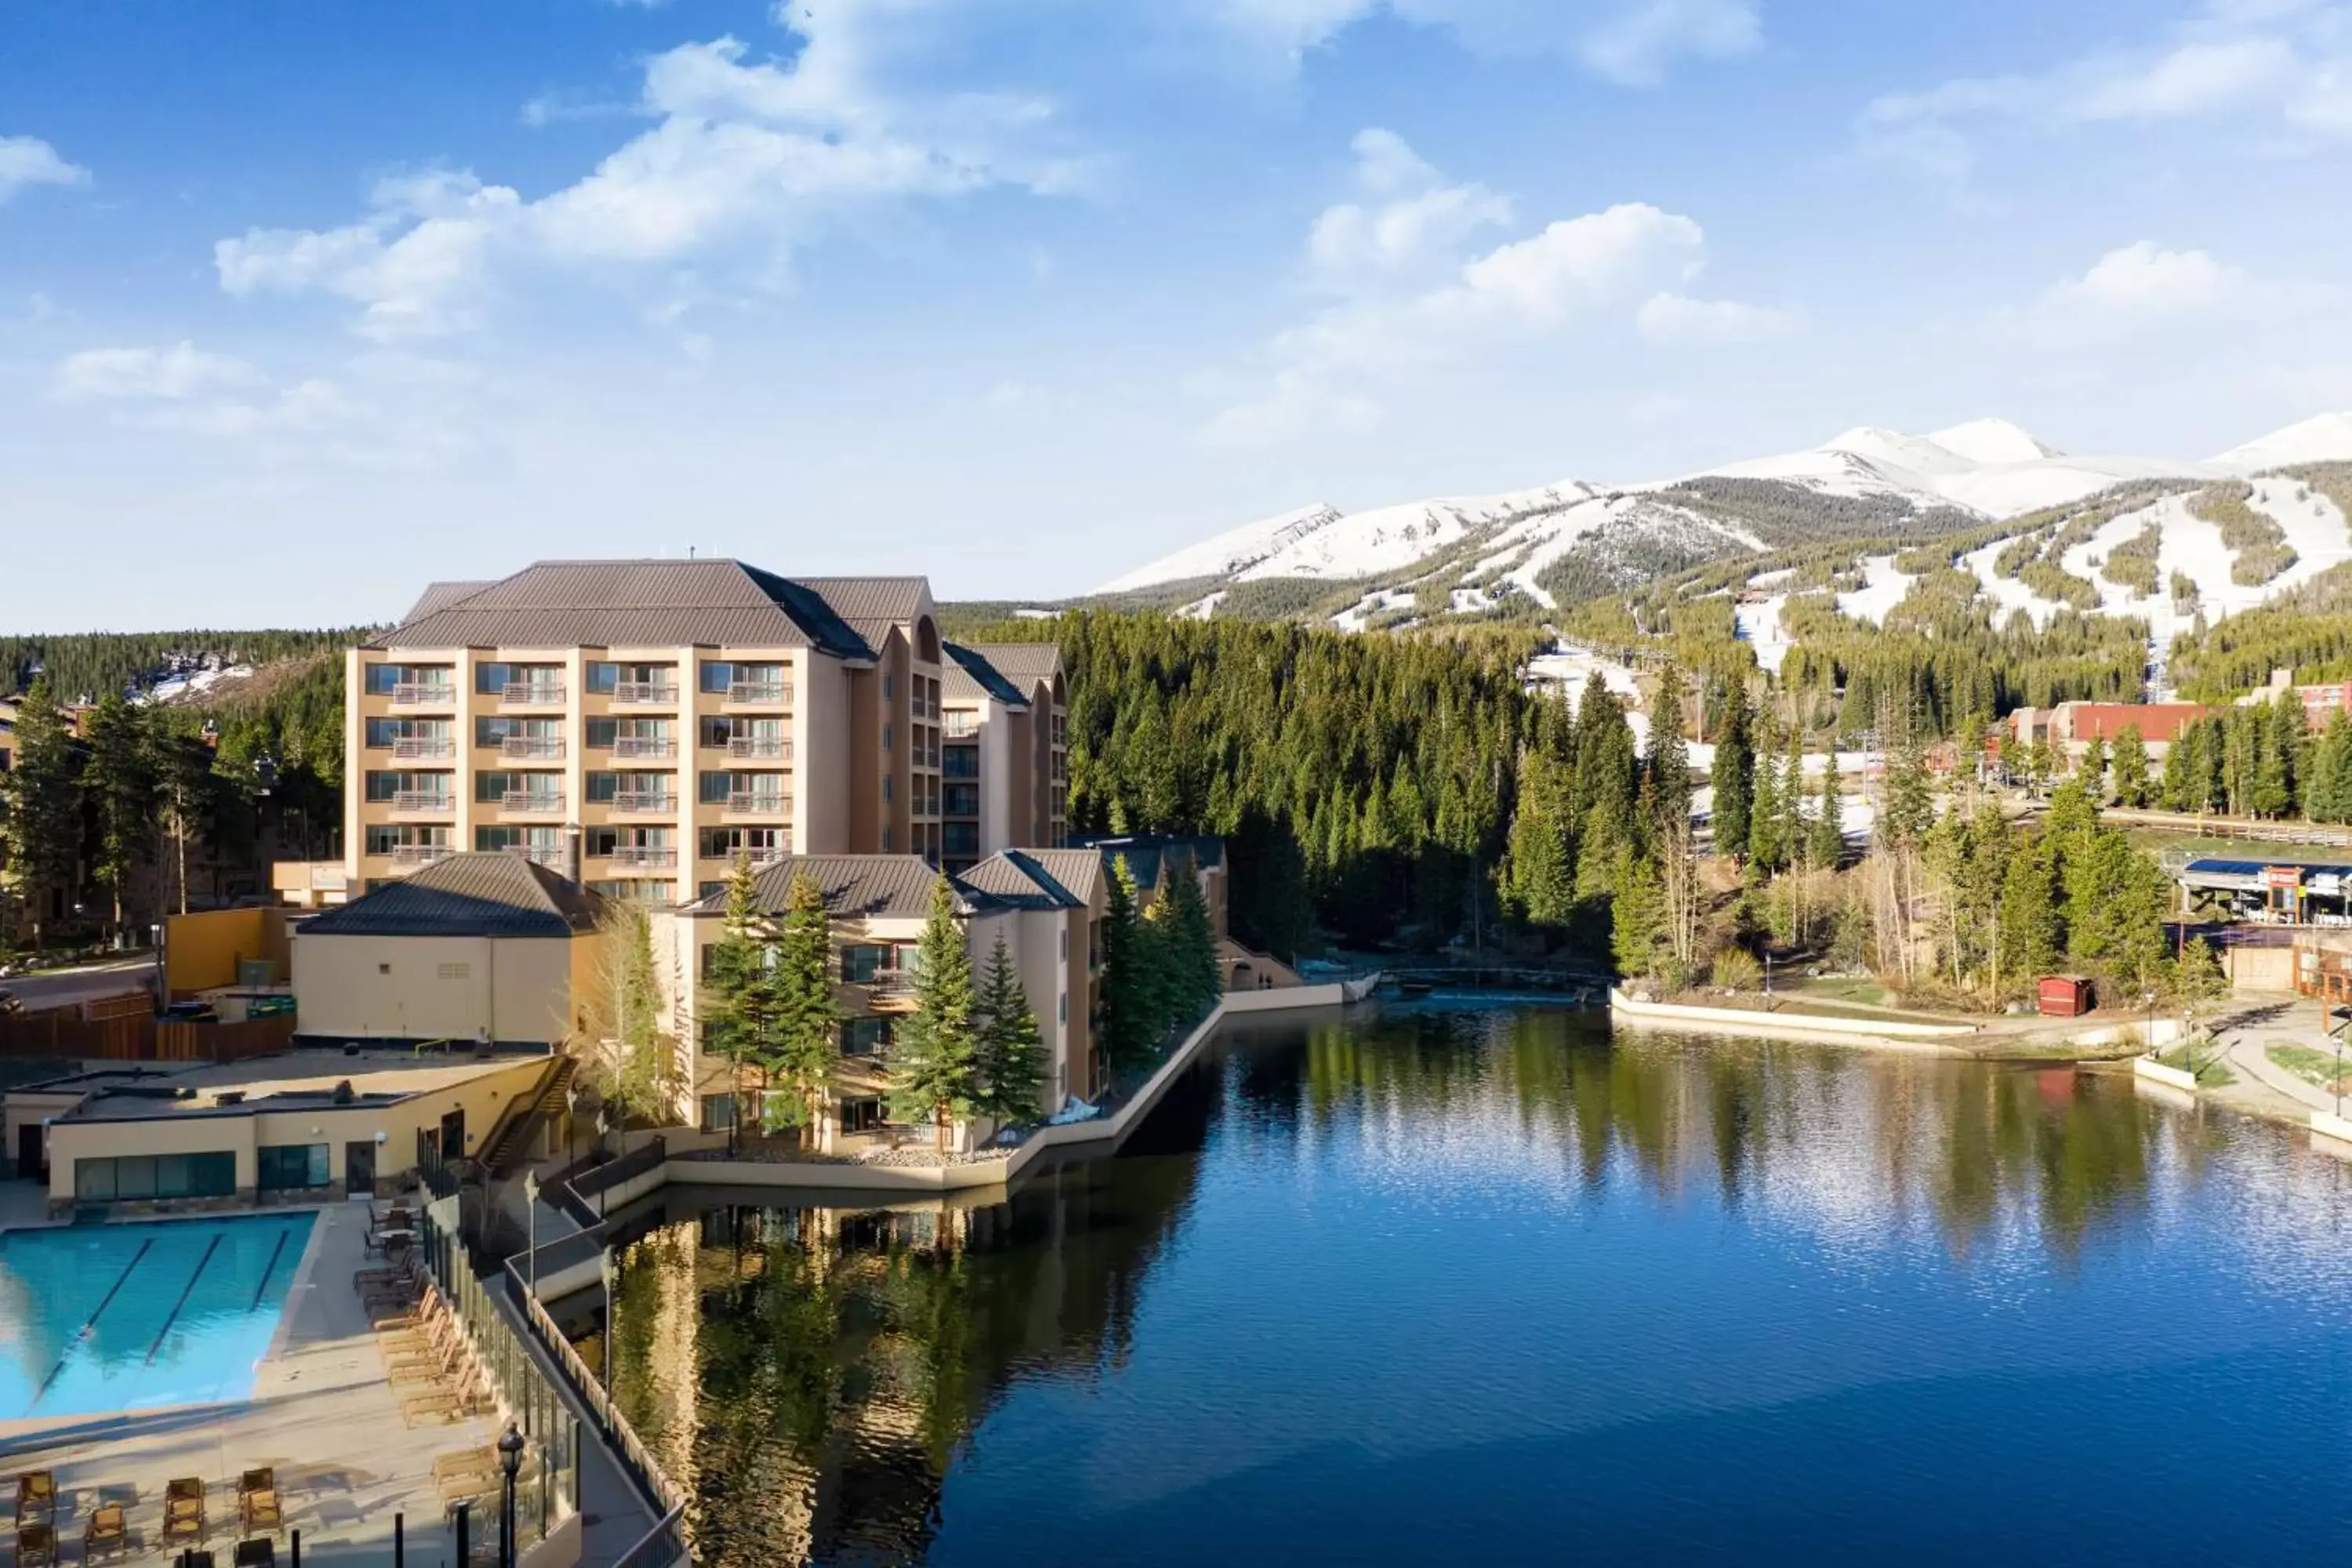 Property building, Pool View in Marriott's Mountain Valley Lodge at Breckenridge